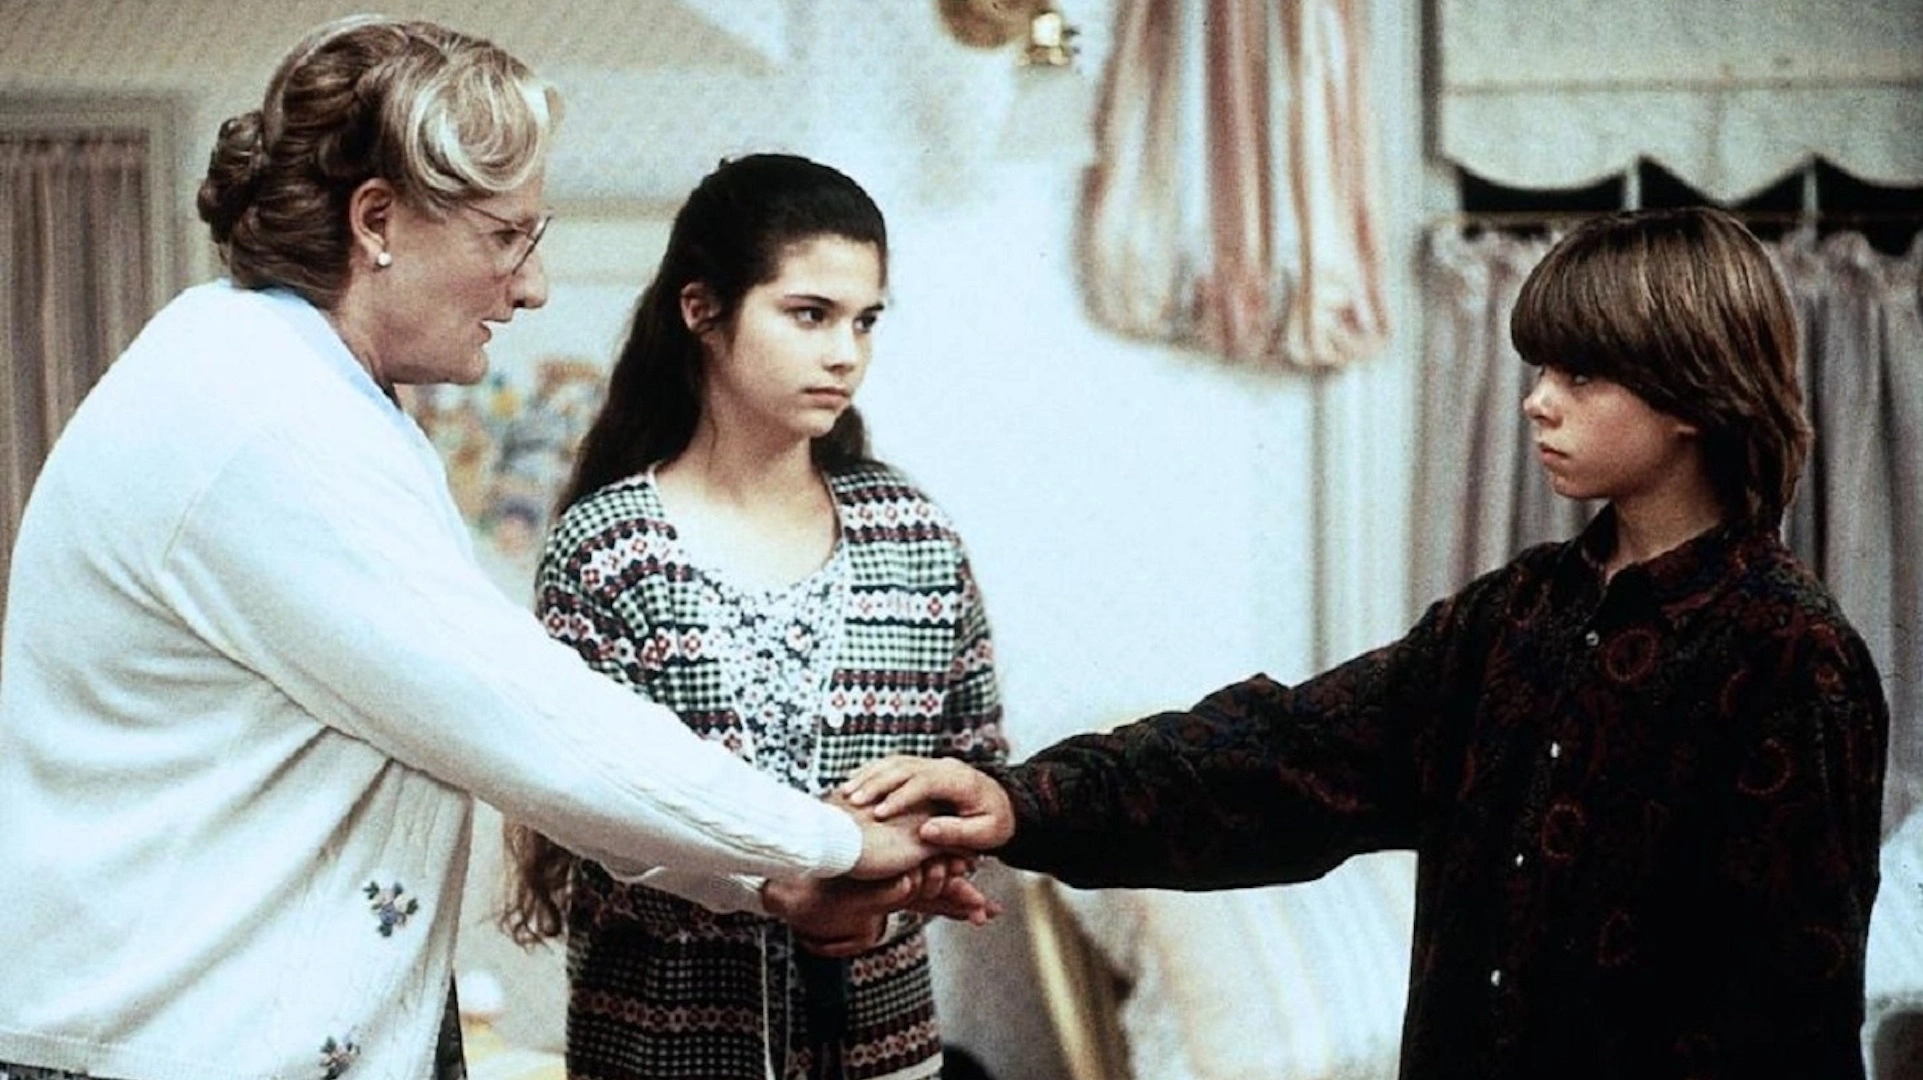 Mrs. Doubtfire' Star Stayed Away From Drugs Thanks to Robin Williams